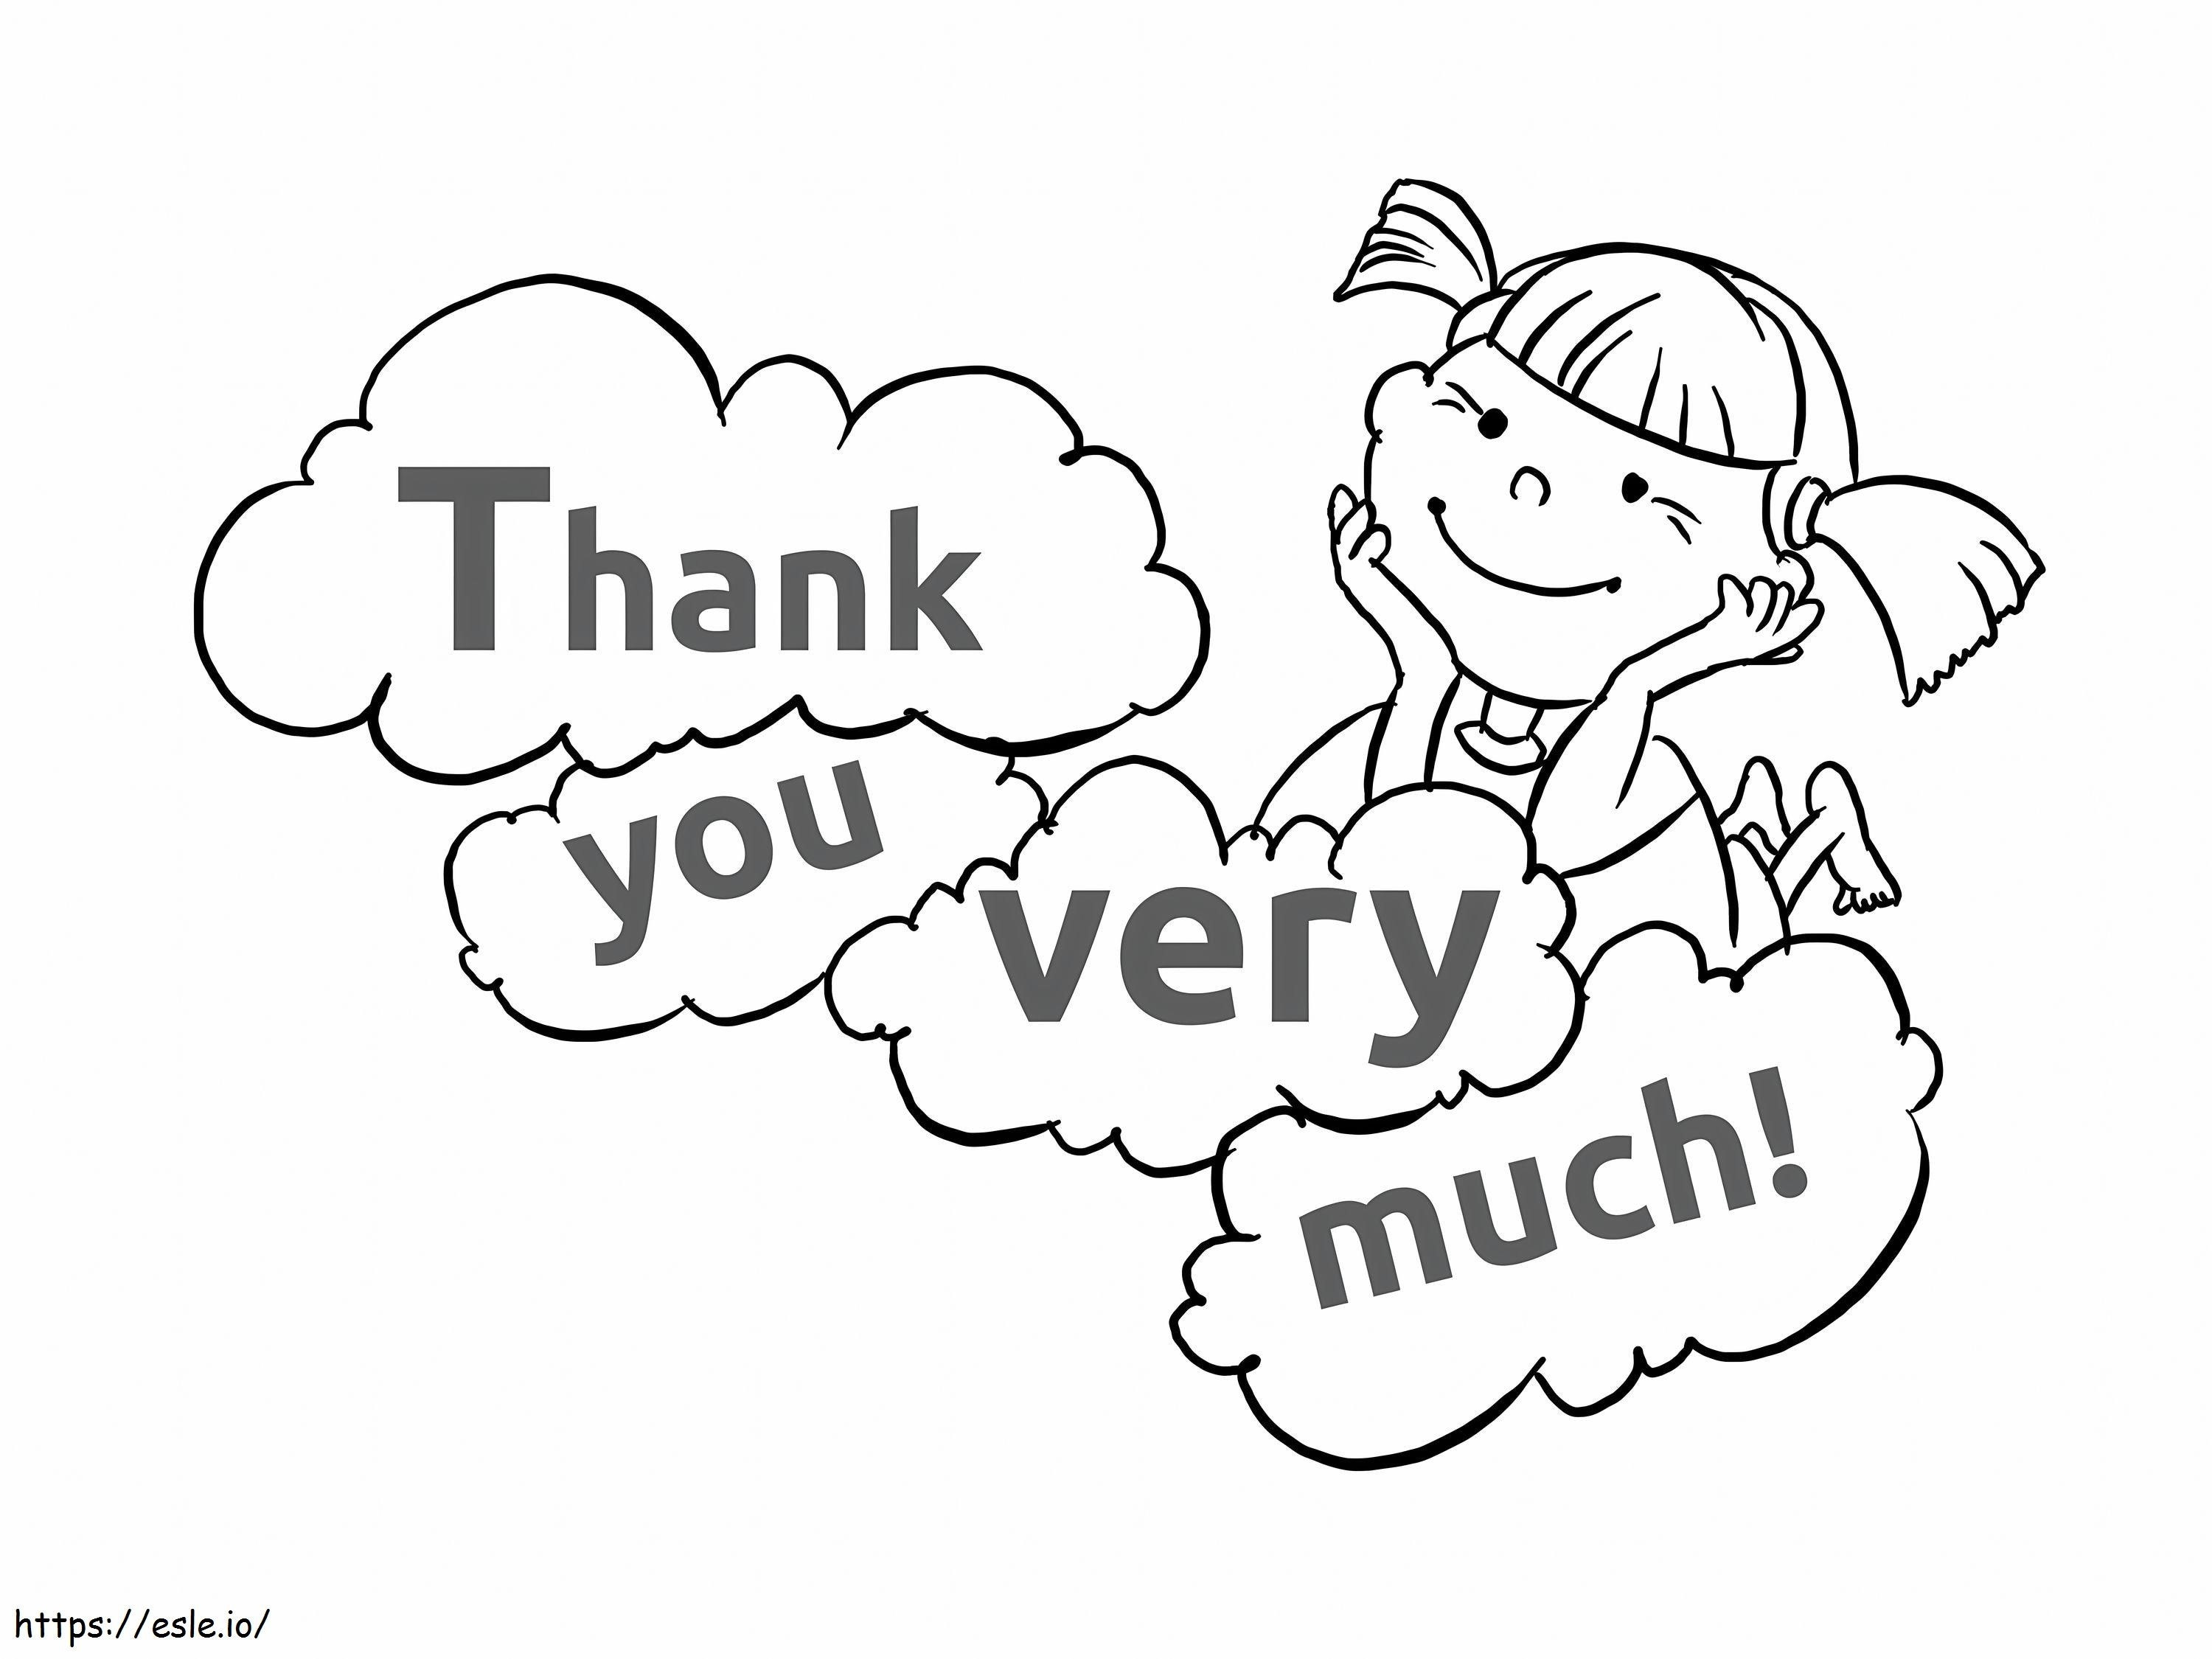 Child Thank You Very Much coloring page